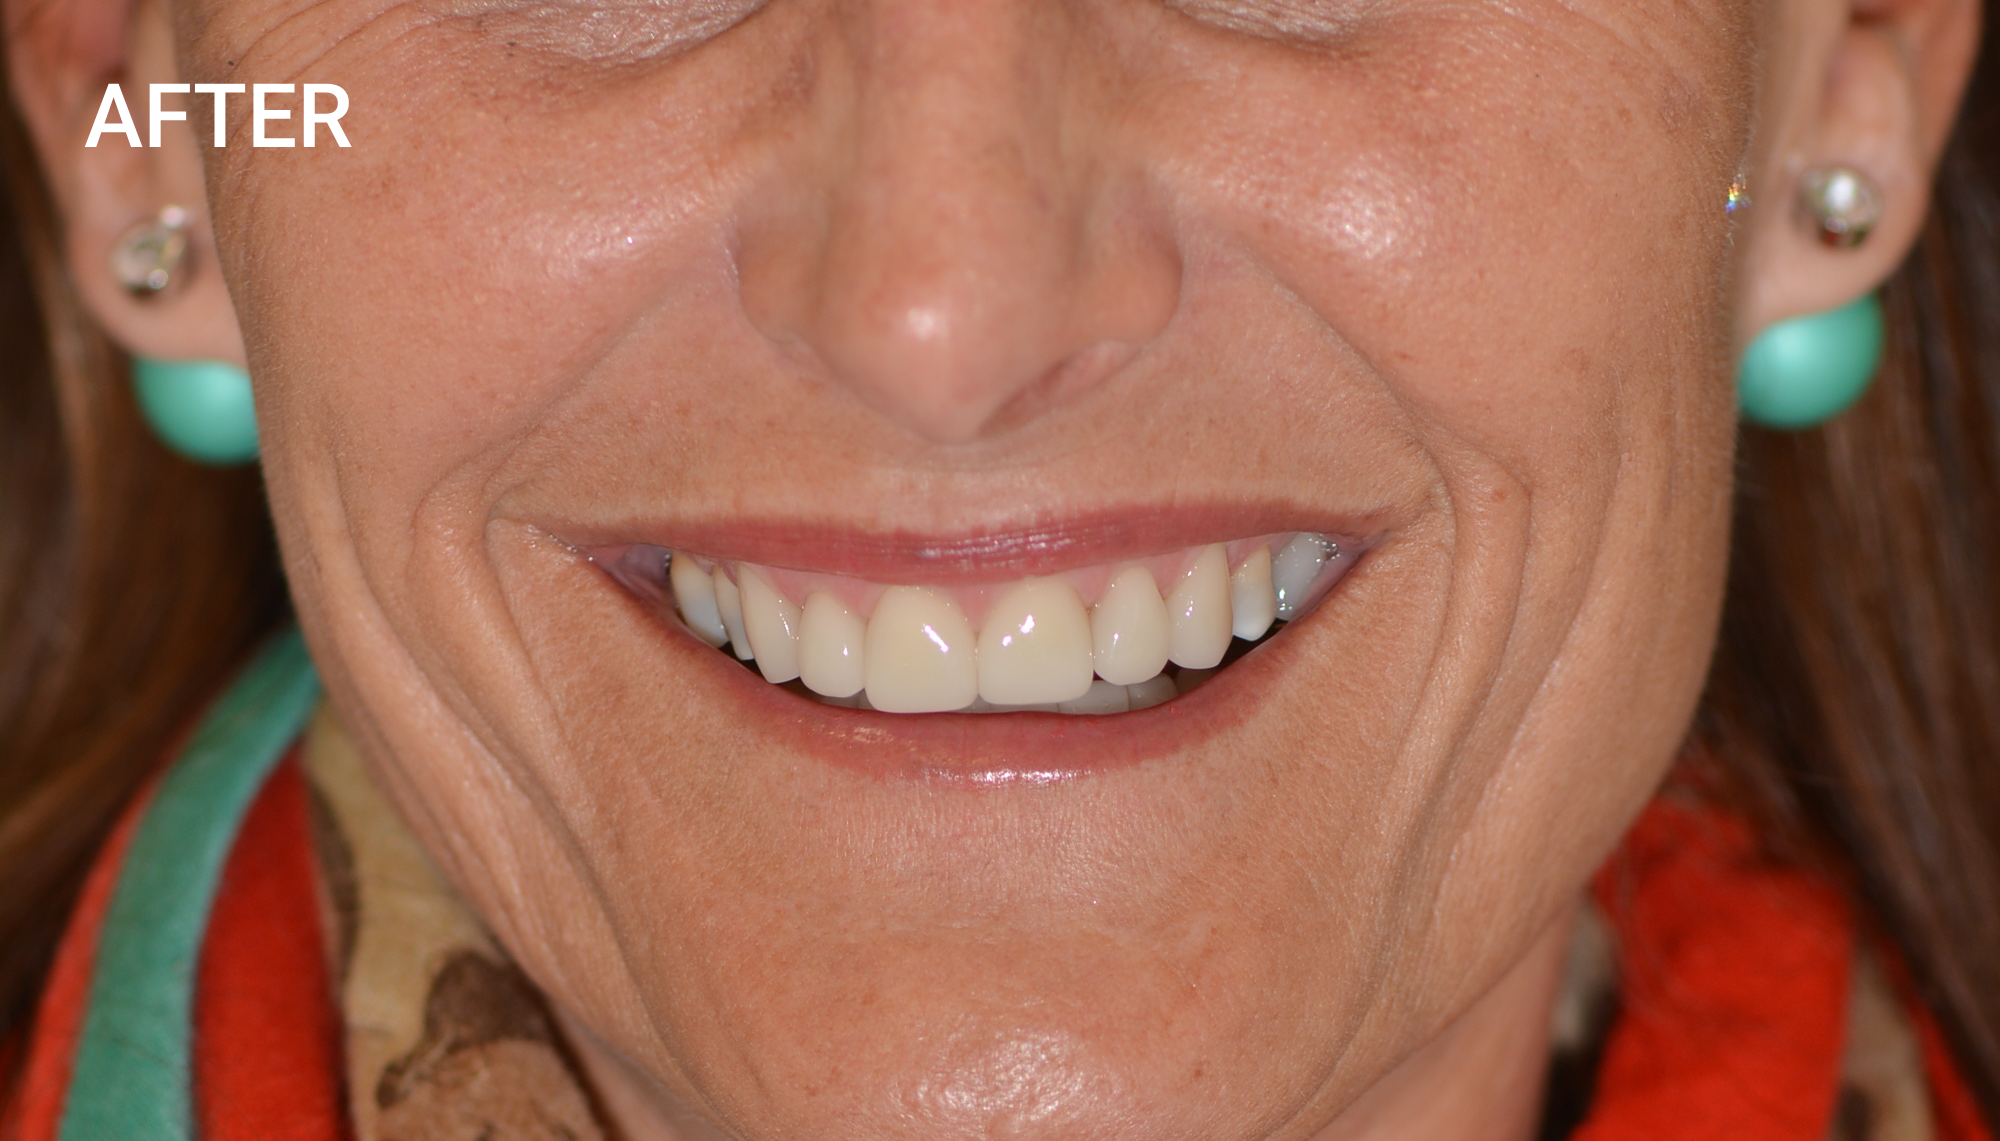 WORK COMPLETED BY DR. MICHAEL HARRIS (Dentist)